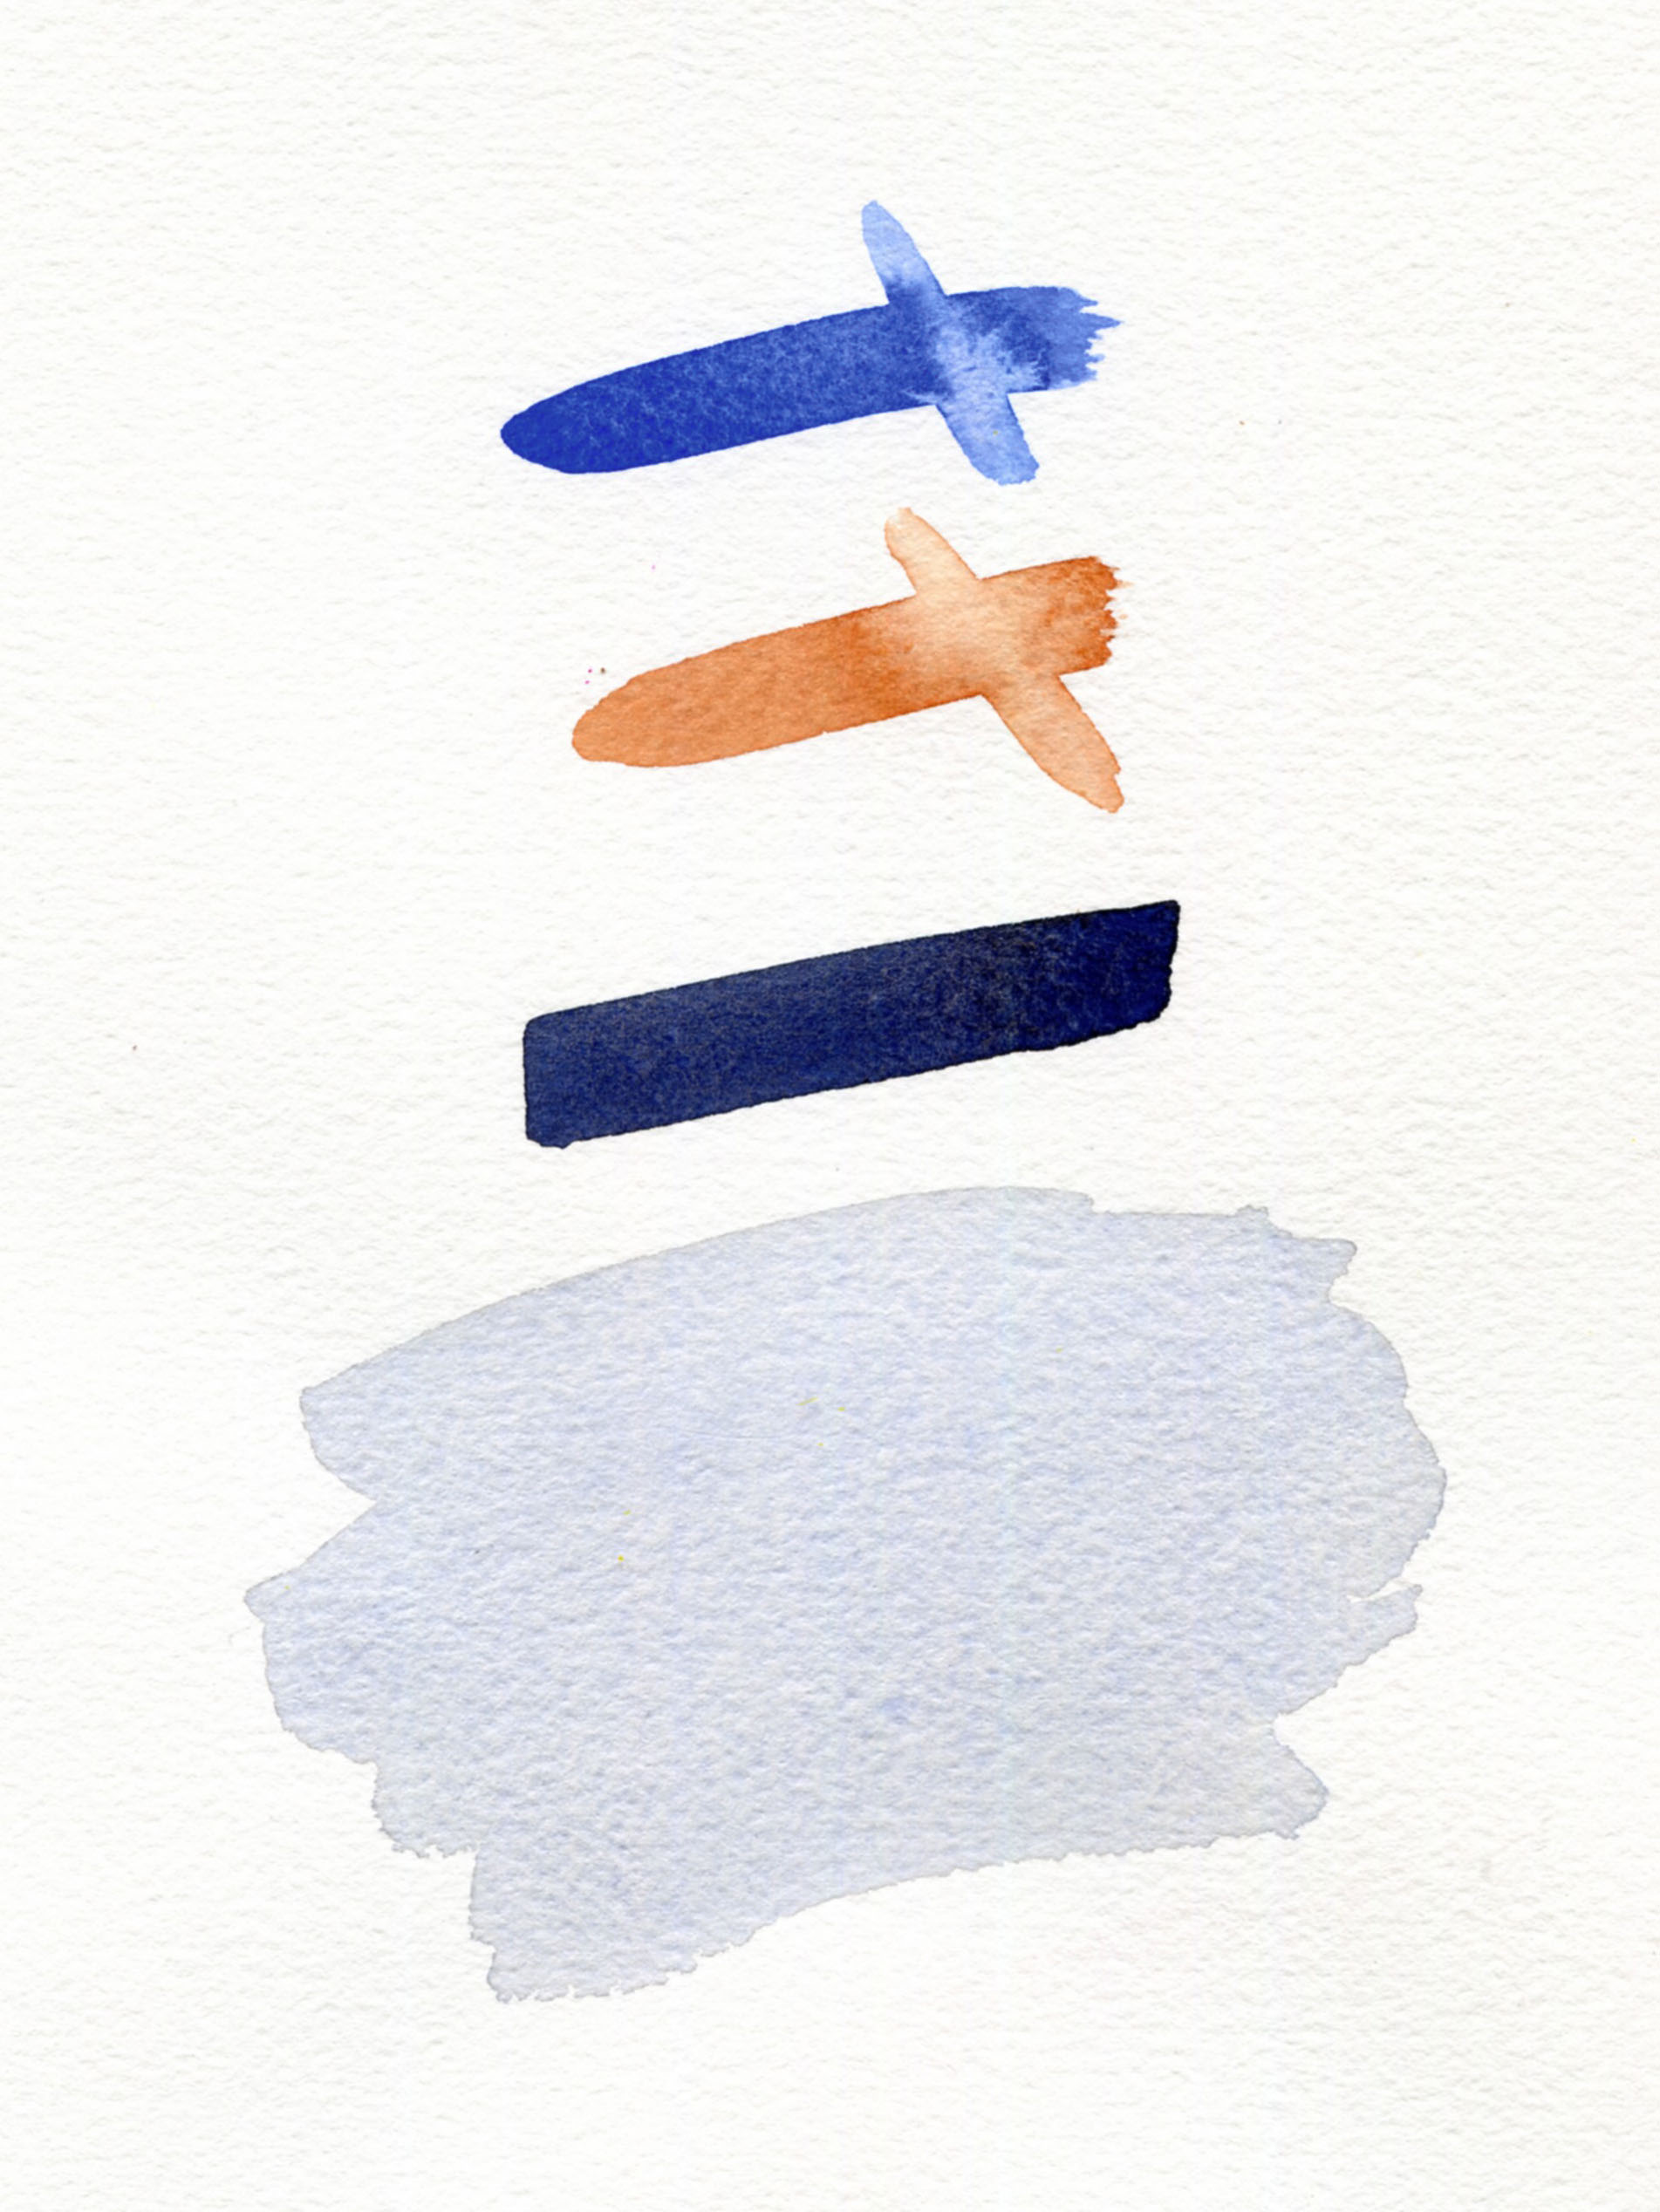 Ink Line and Watercolor: Art Tips by Nita Leland